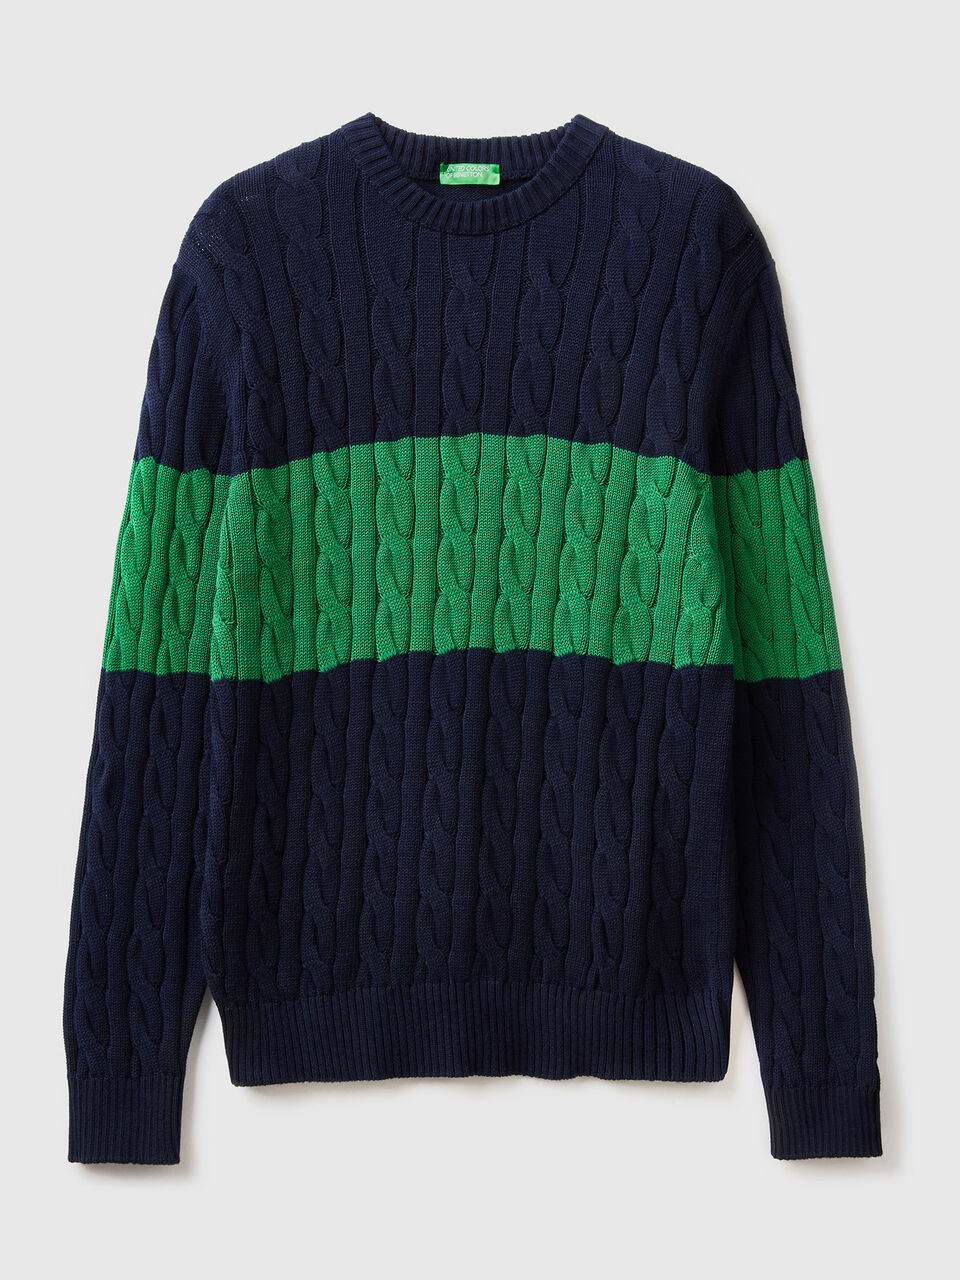 CABLE CREW NECK SWEATER WITH POCKETS - C4443